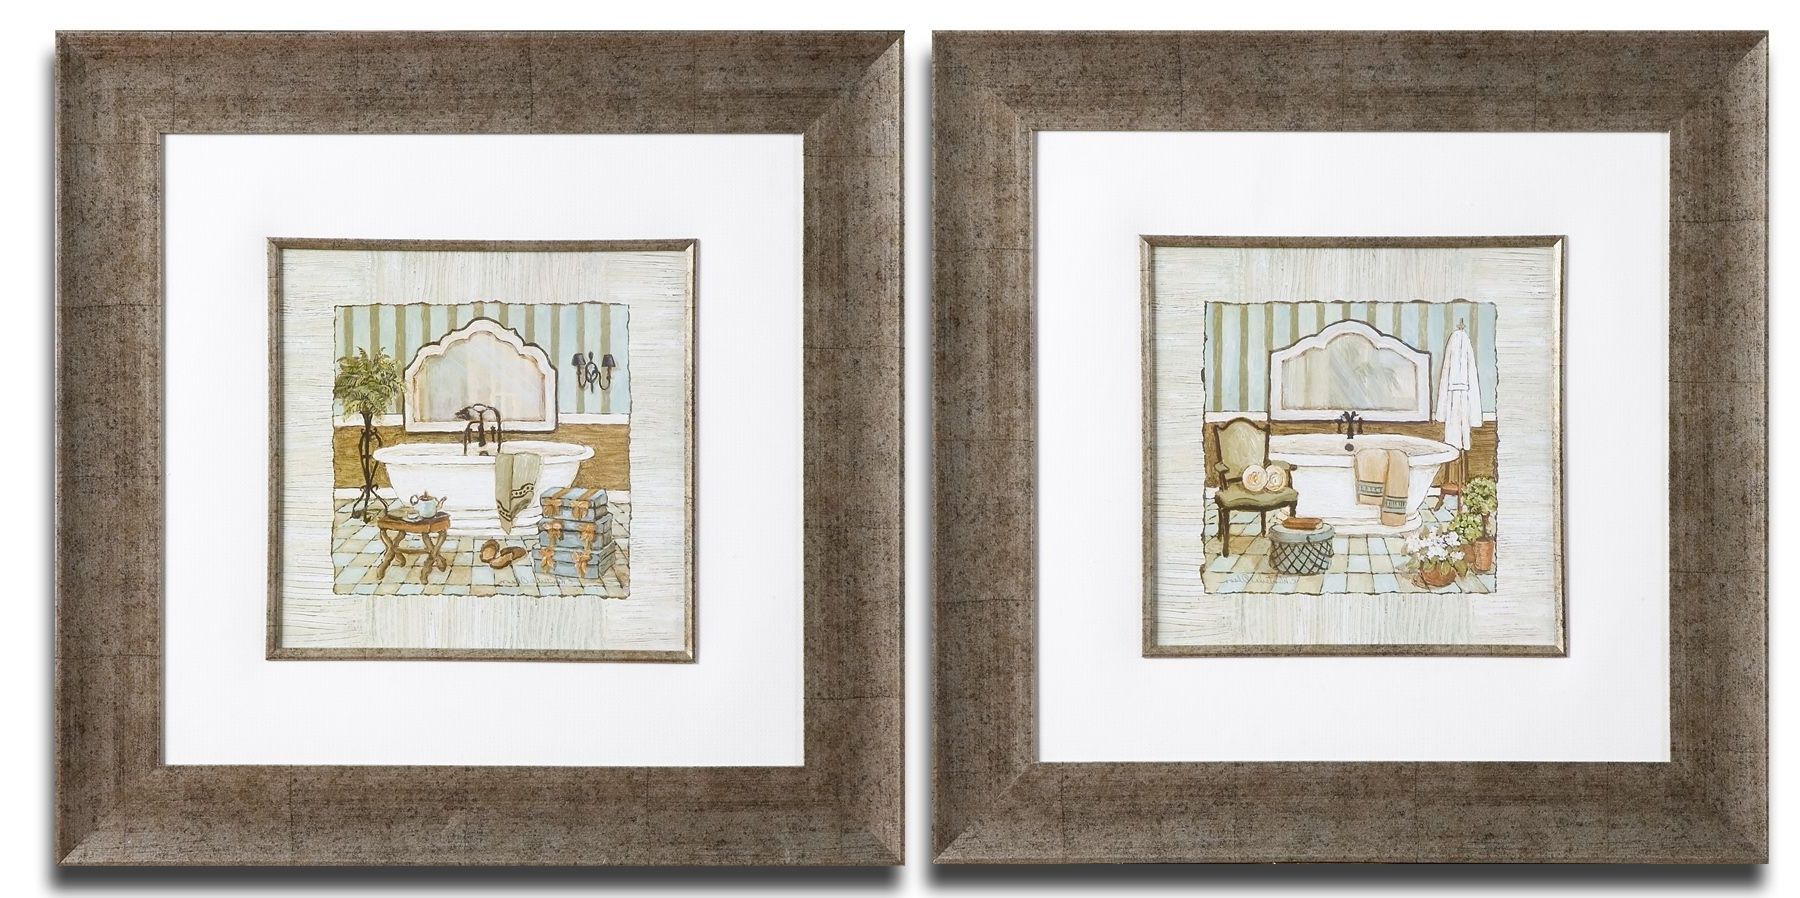 Framed Art For Bathroom, French Bathroom Prints Vintage Throughout Fashionable French Bathroom Wall Art (View 4 of 15)